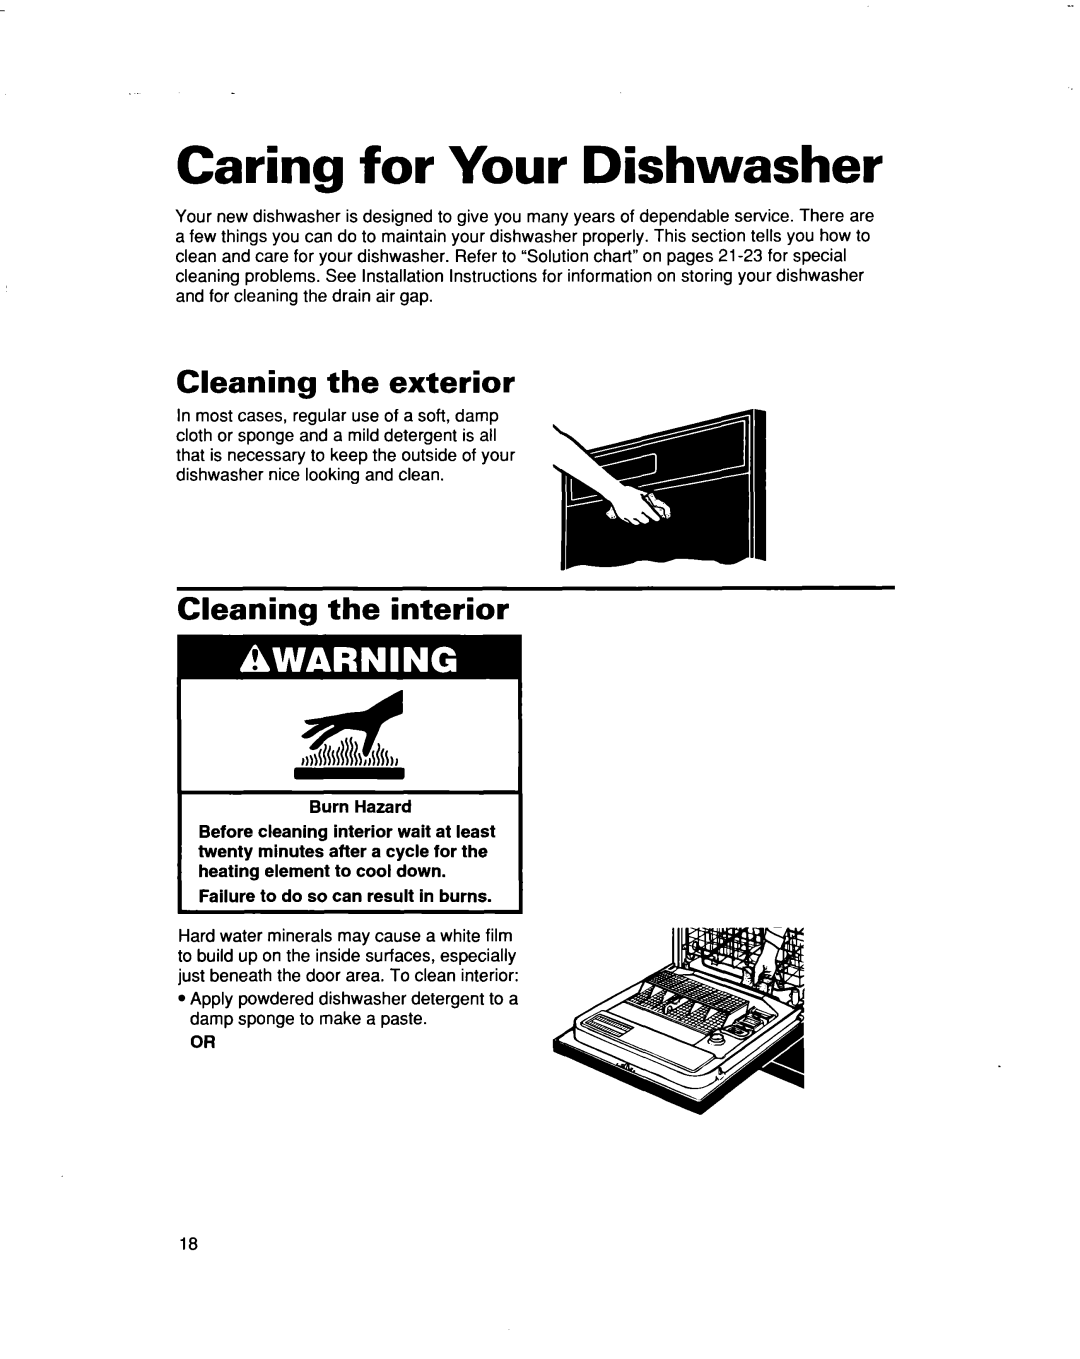 Whirlpool DU930QWD, DU935QWD warranty Caring for Your Dishwasher, Cleaning the exterior Cleaning the interior 